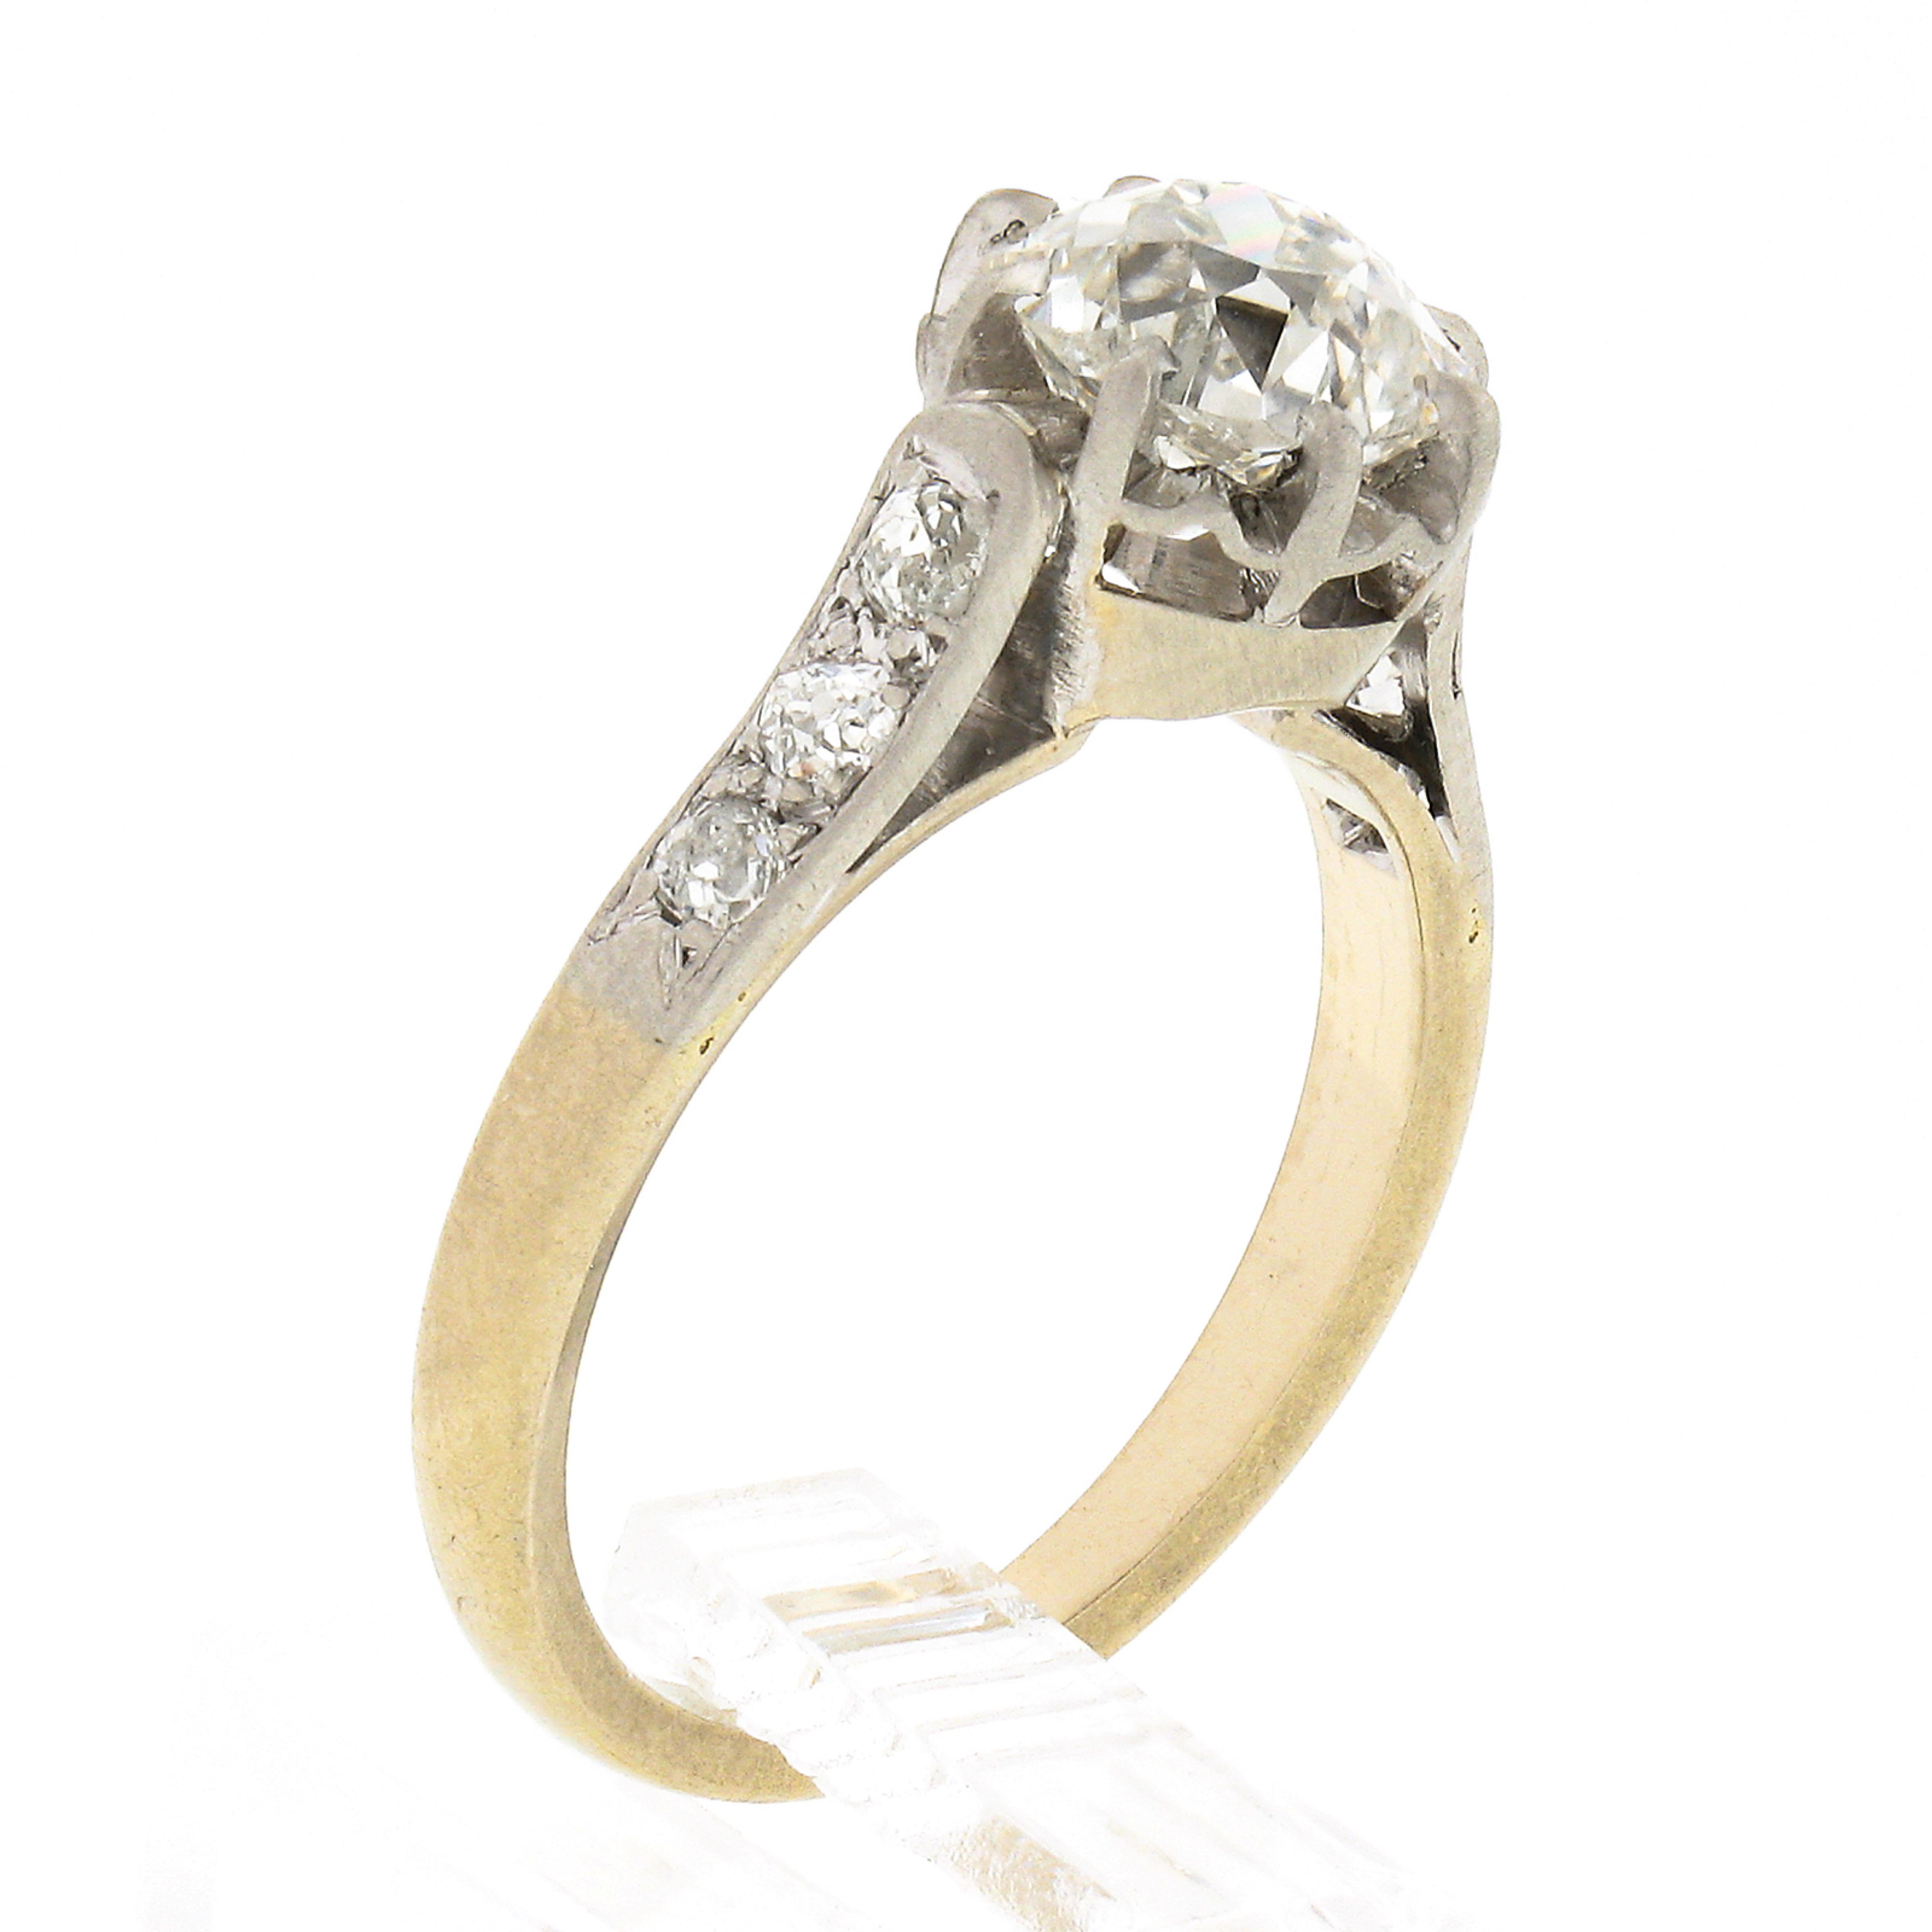 Antique Edwardian French Plat 18k Gold 1.7ct GIA European Diamond Solitaire Ring For Sale 4